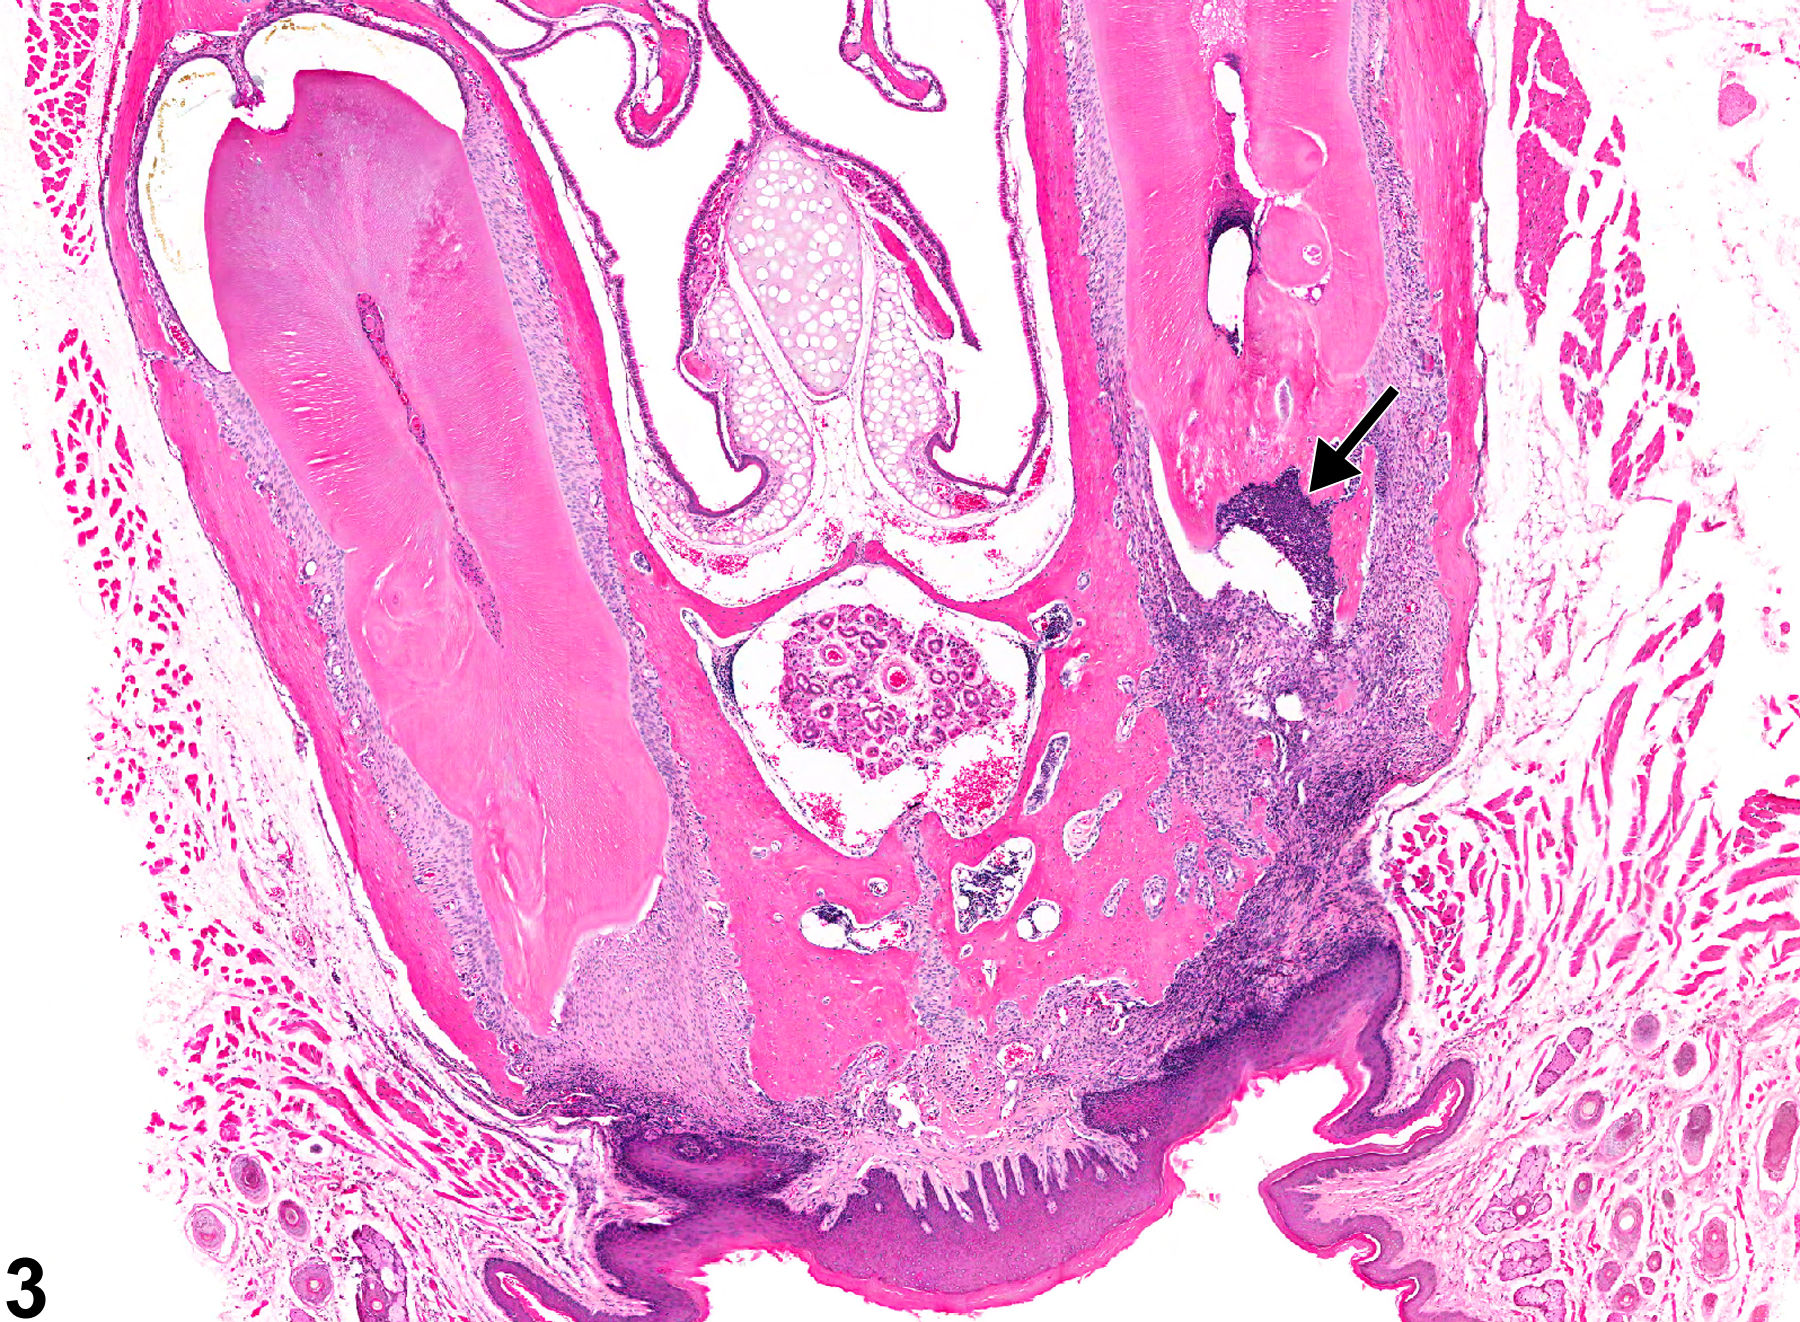 Image of inflammation in the tooth from a male B6C3F1 mouse in a chronic study